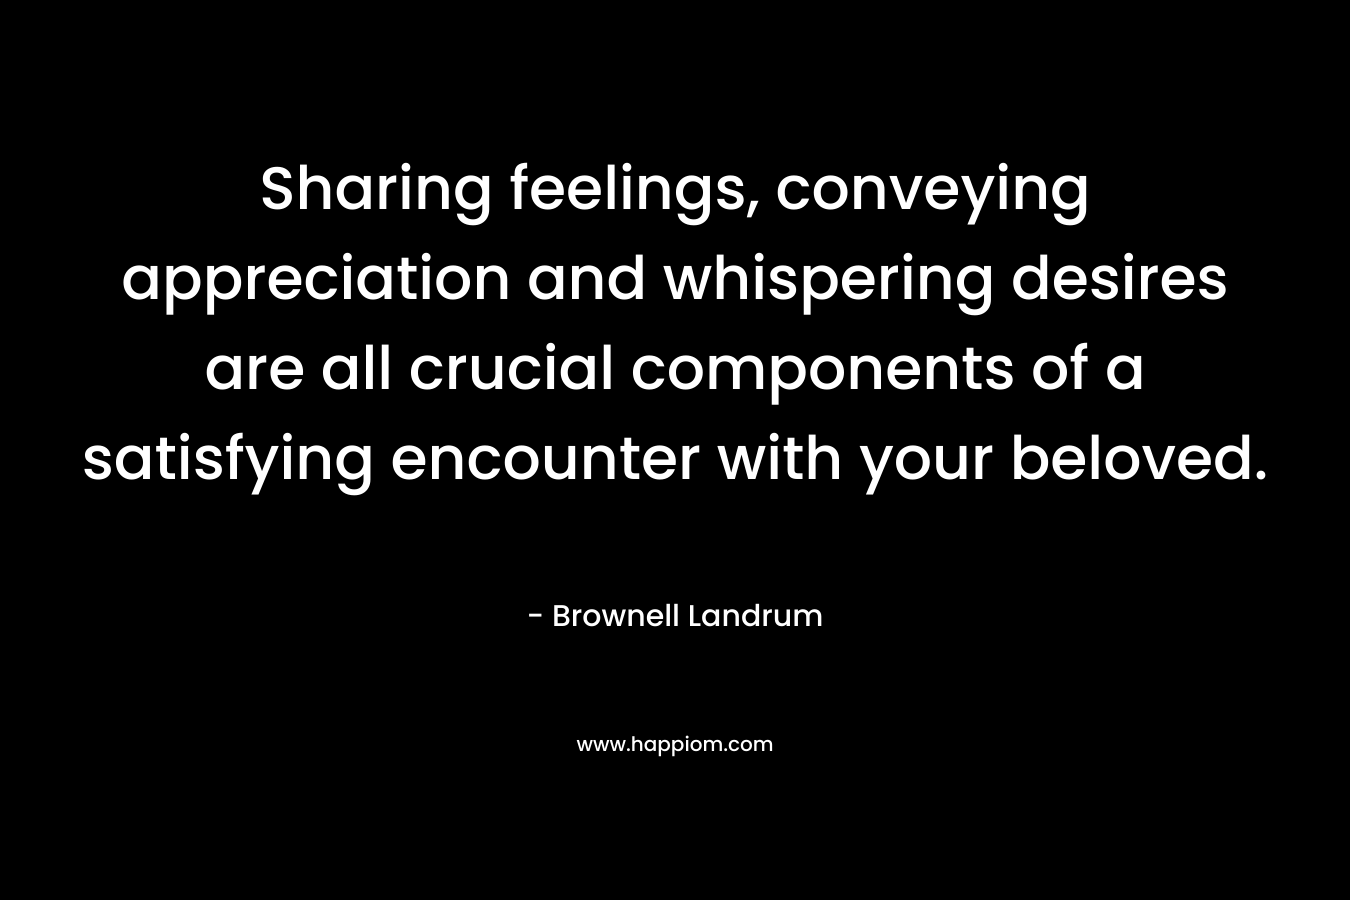 Sharing feelings, conveying appreciation and whispering desires are all crucial components of a satisfying encounter with your beloved. – Brownell Landrum